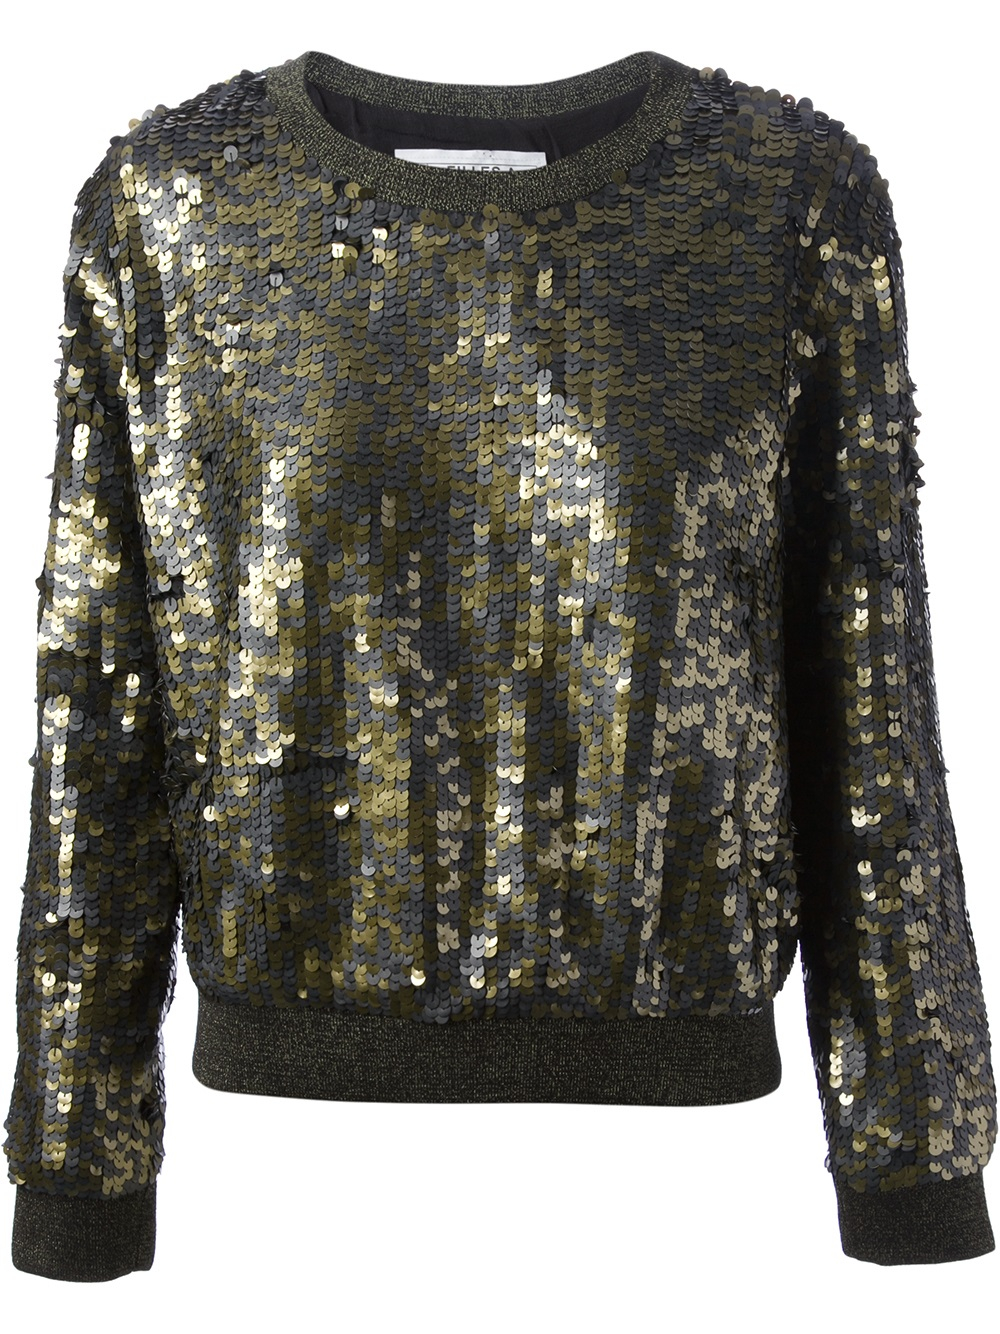 Lyst - Filles A Papa Sequin Embellished Sweatshirt in Gray